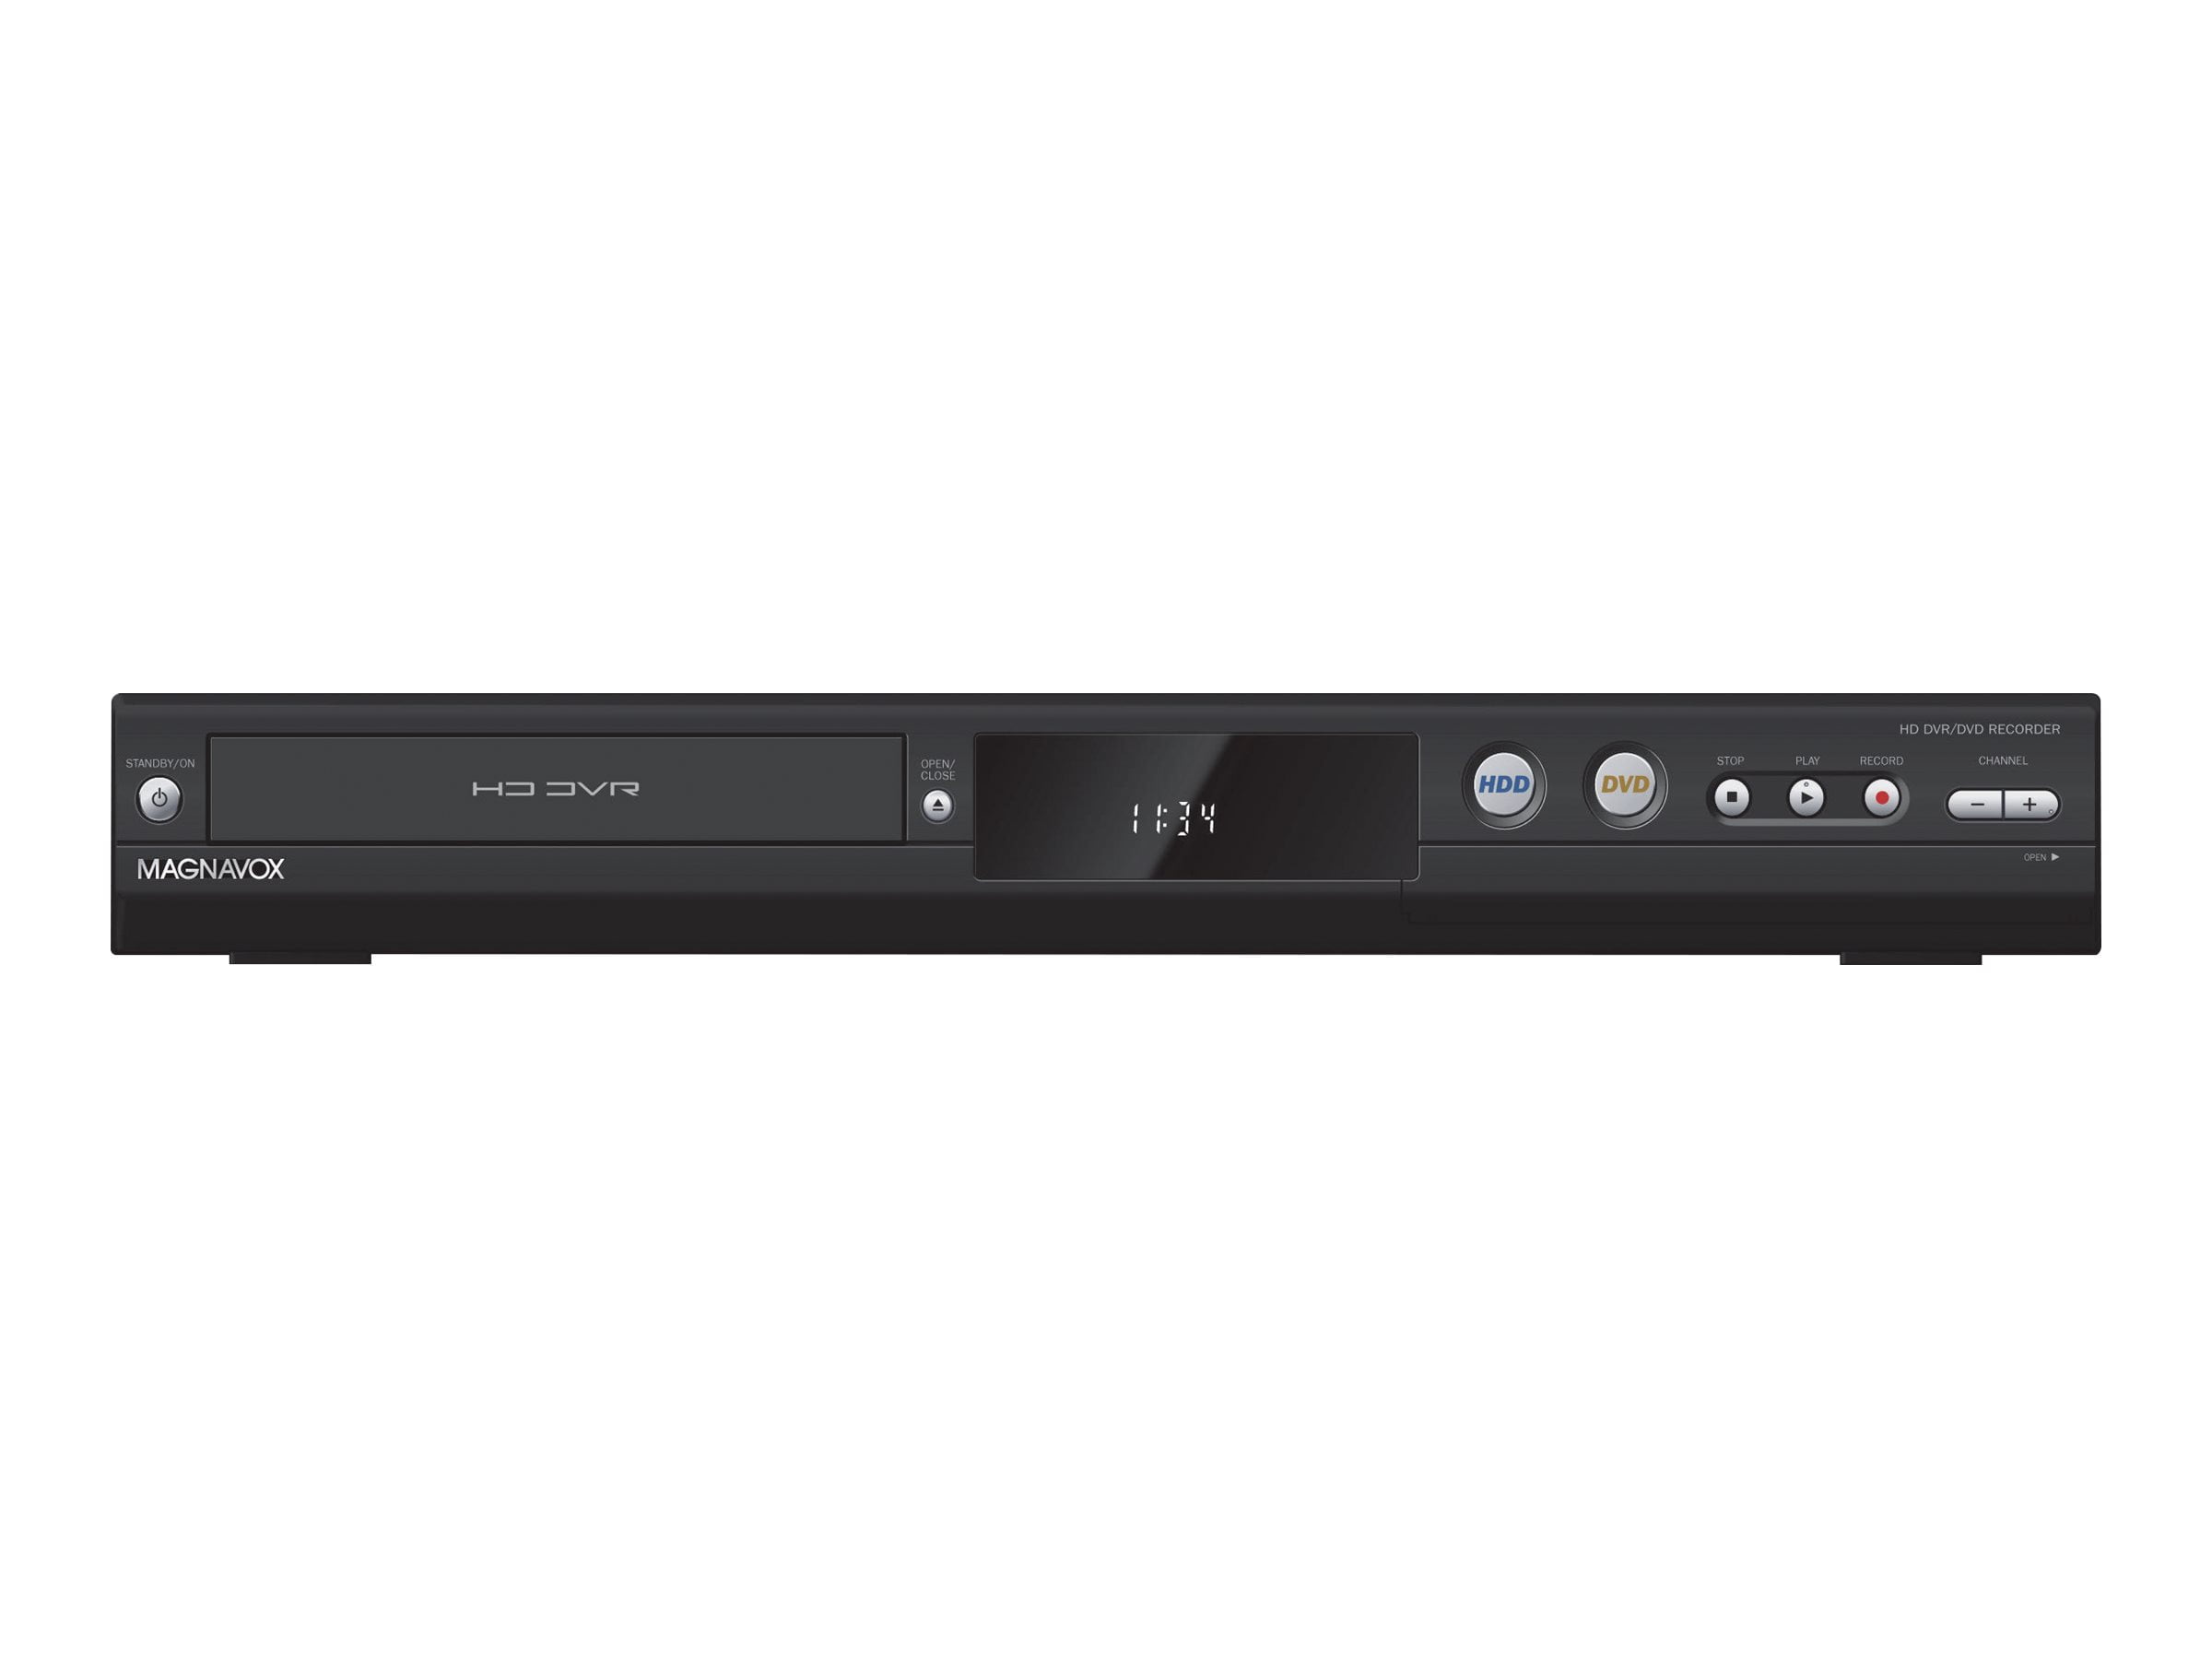 Gelach straffen Donker worden Philips Magnavox MDR865H - DVD recorder with TV tuner and HDD - upscaling -  Walmart.com